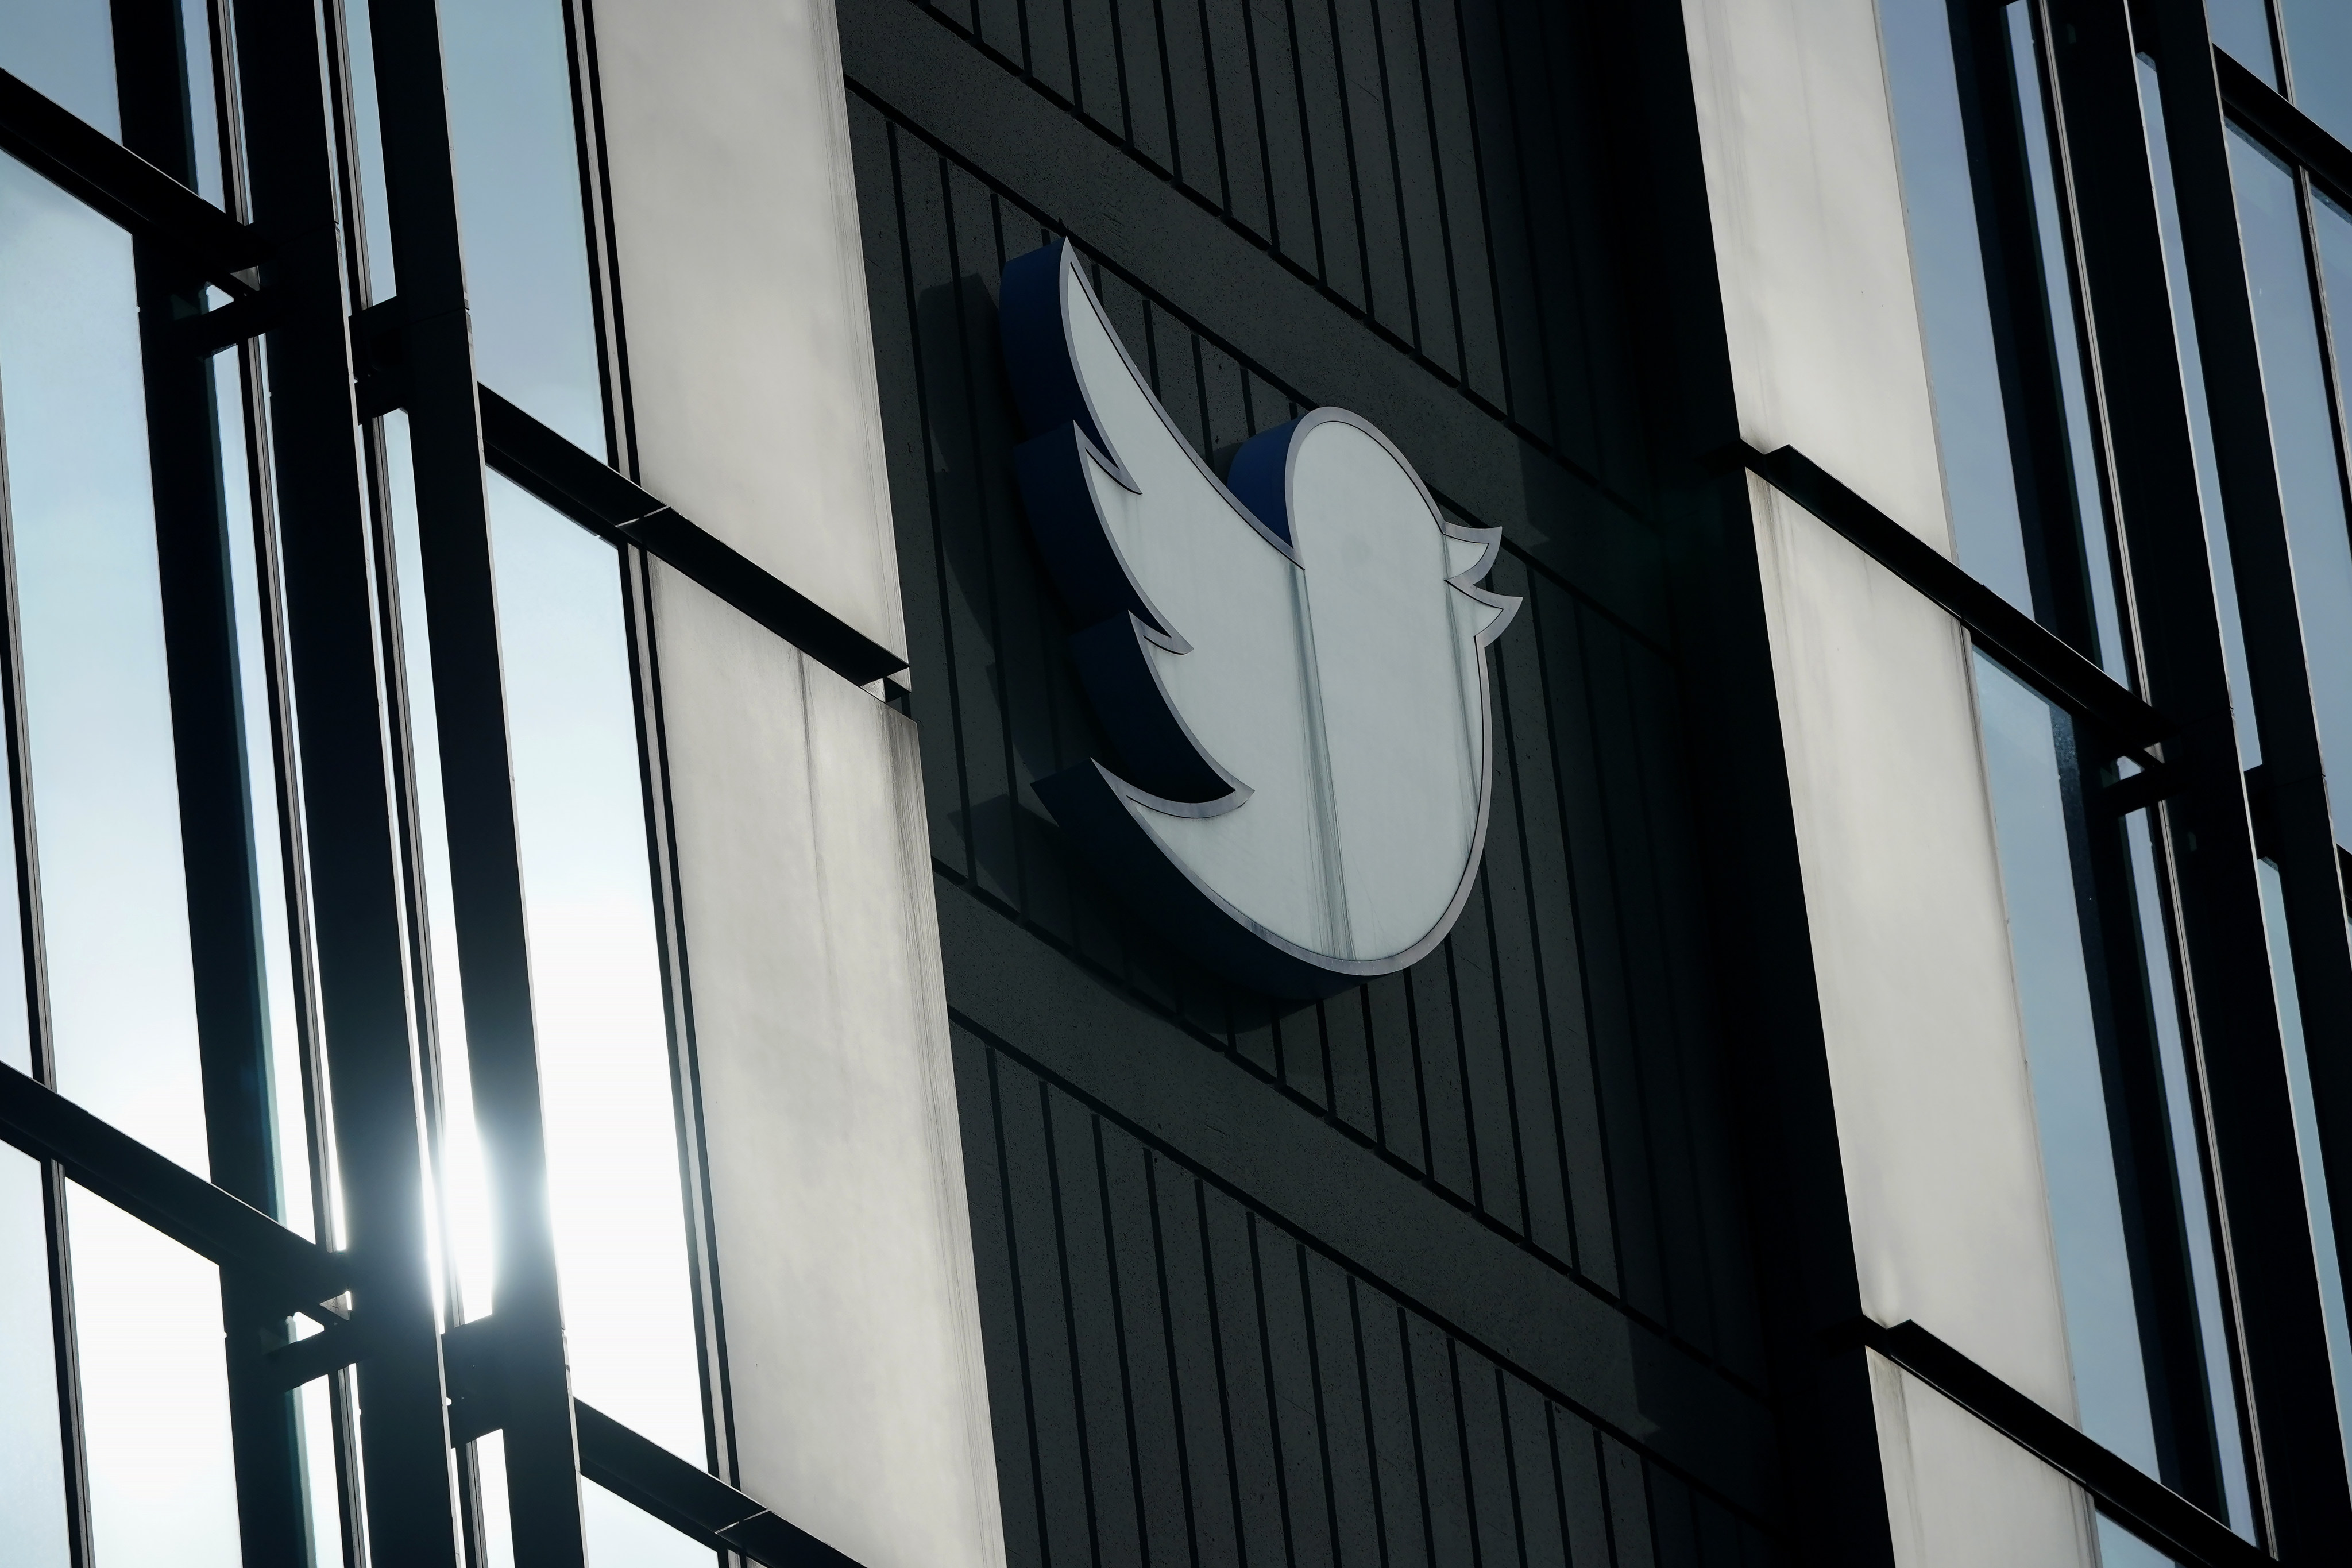 A Twitter logo hangs outside the company’s offices in San Francisco. Photo: AP/File